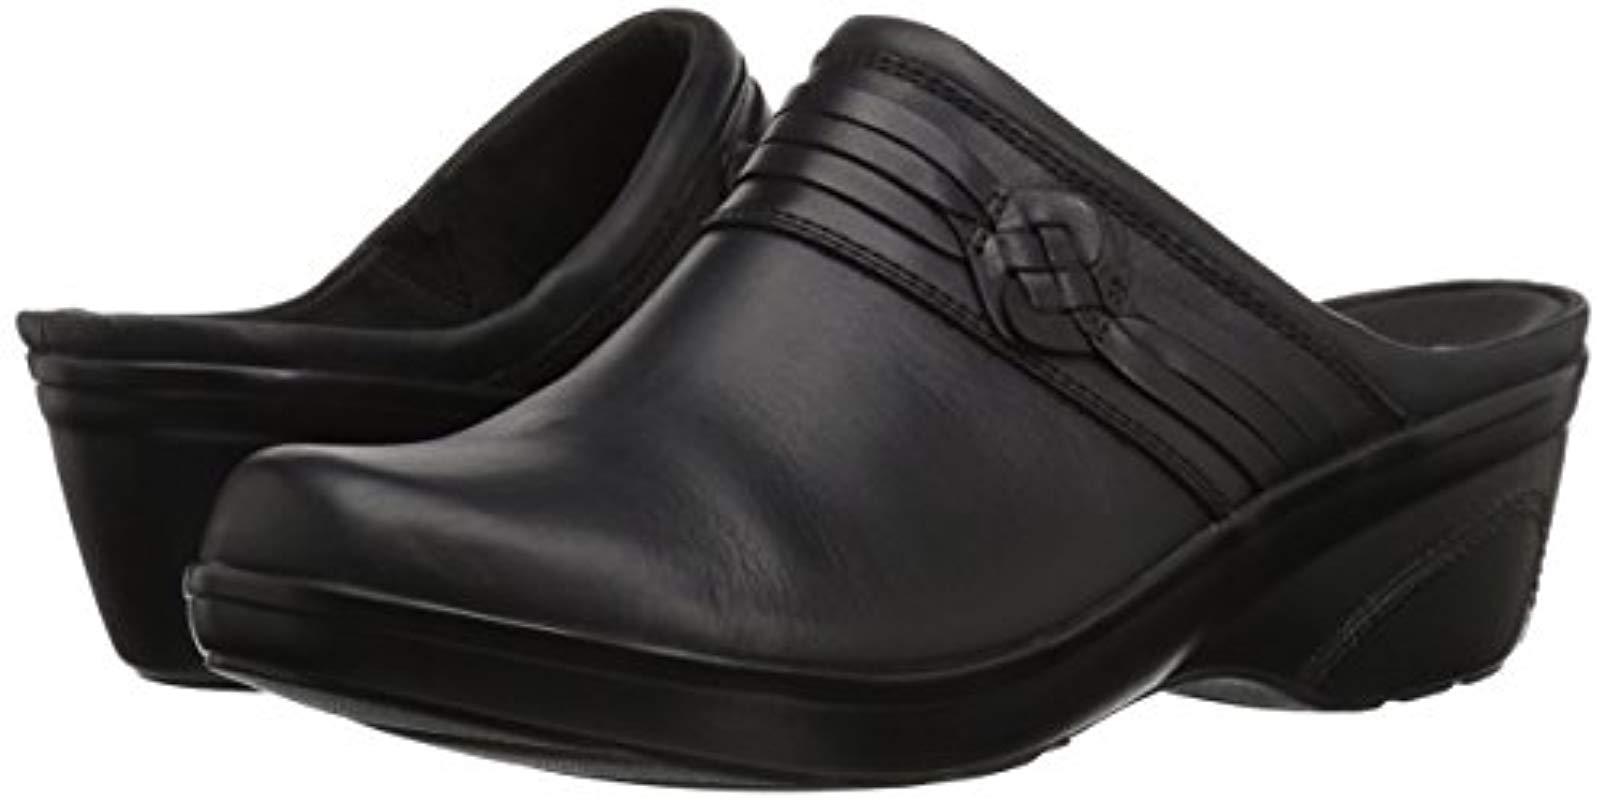 Clarks Leather Marion Jess Clog in 